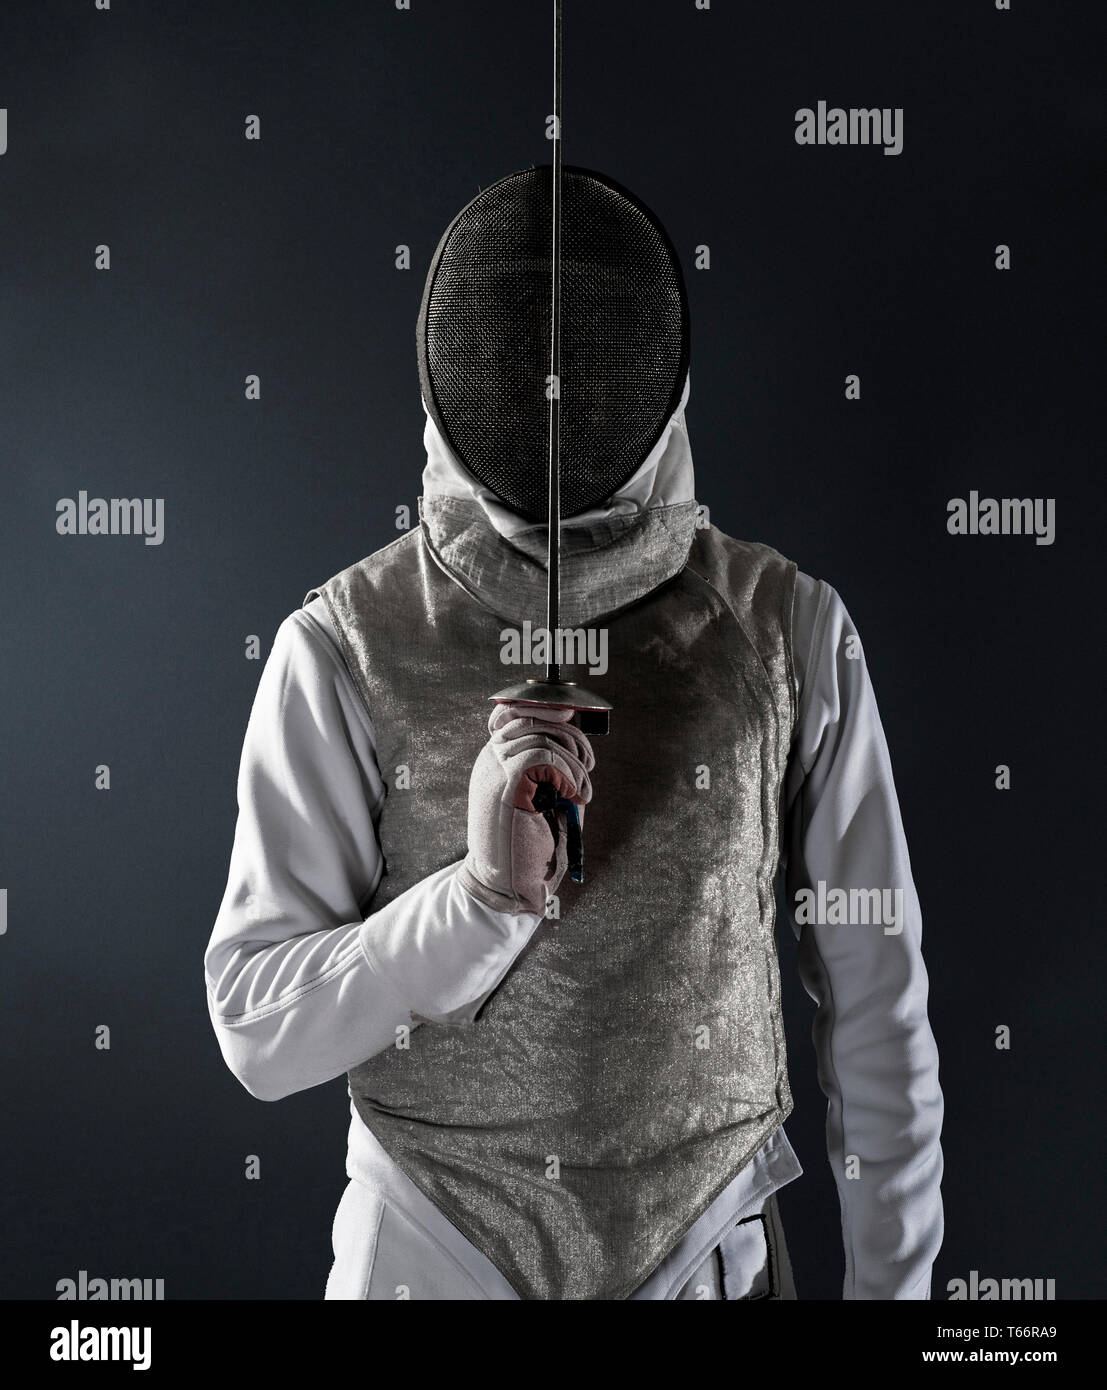 Portrait man in fencing uniform and mask Stock Photo